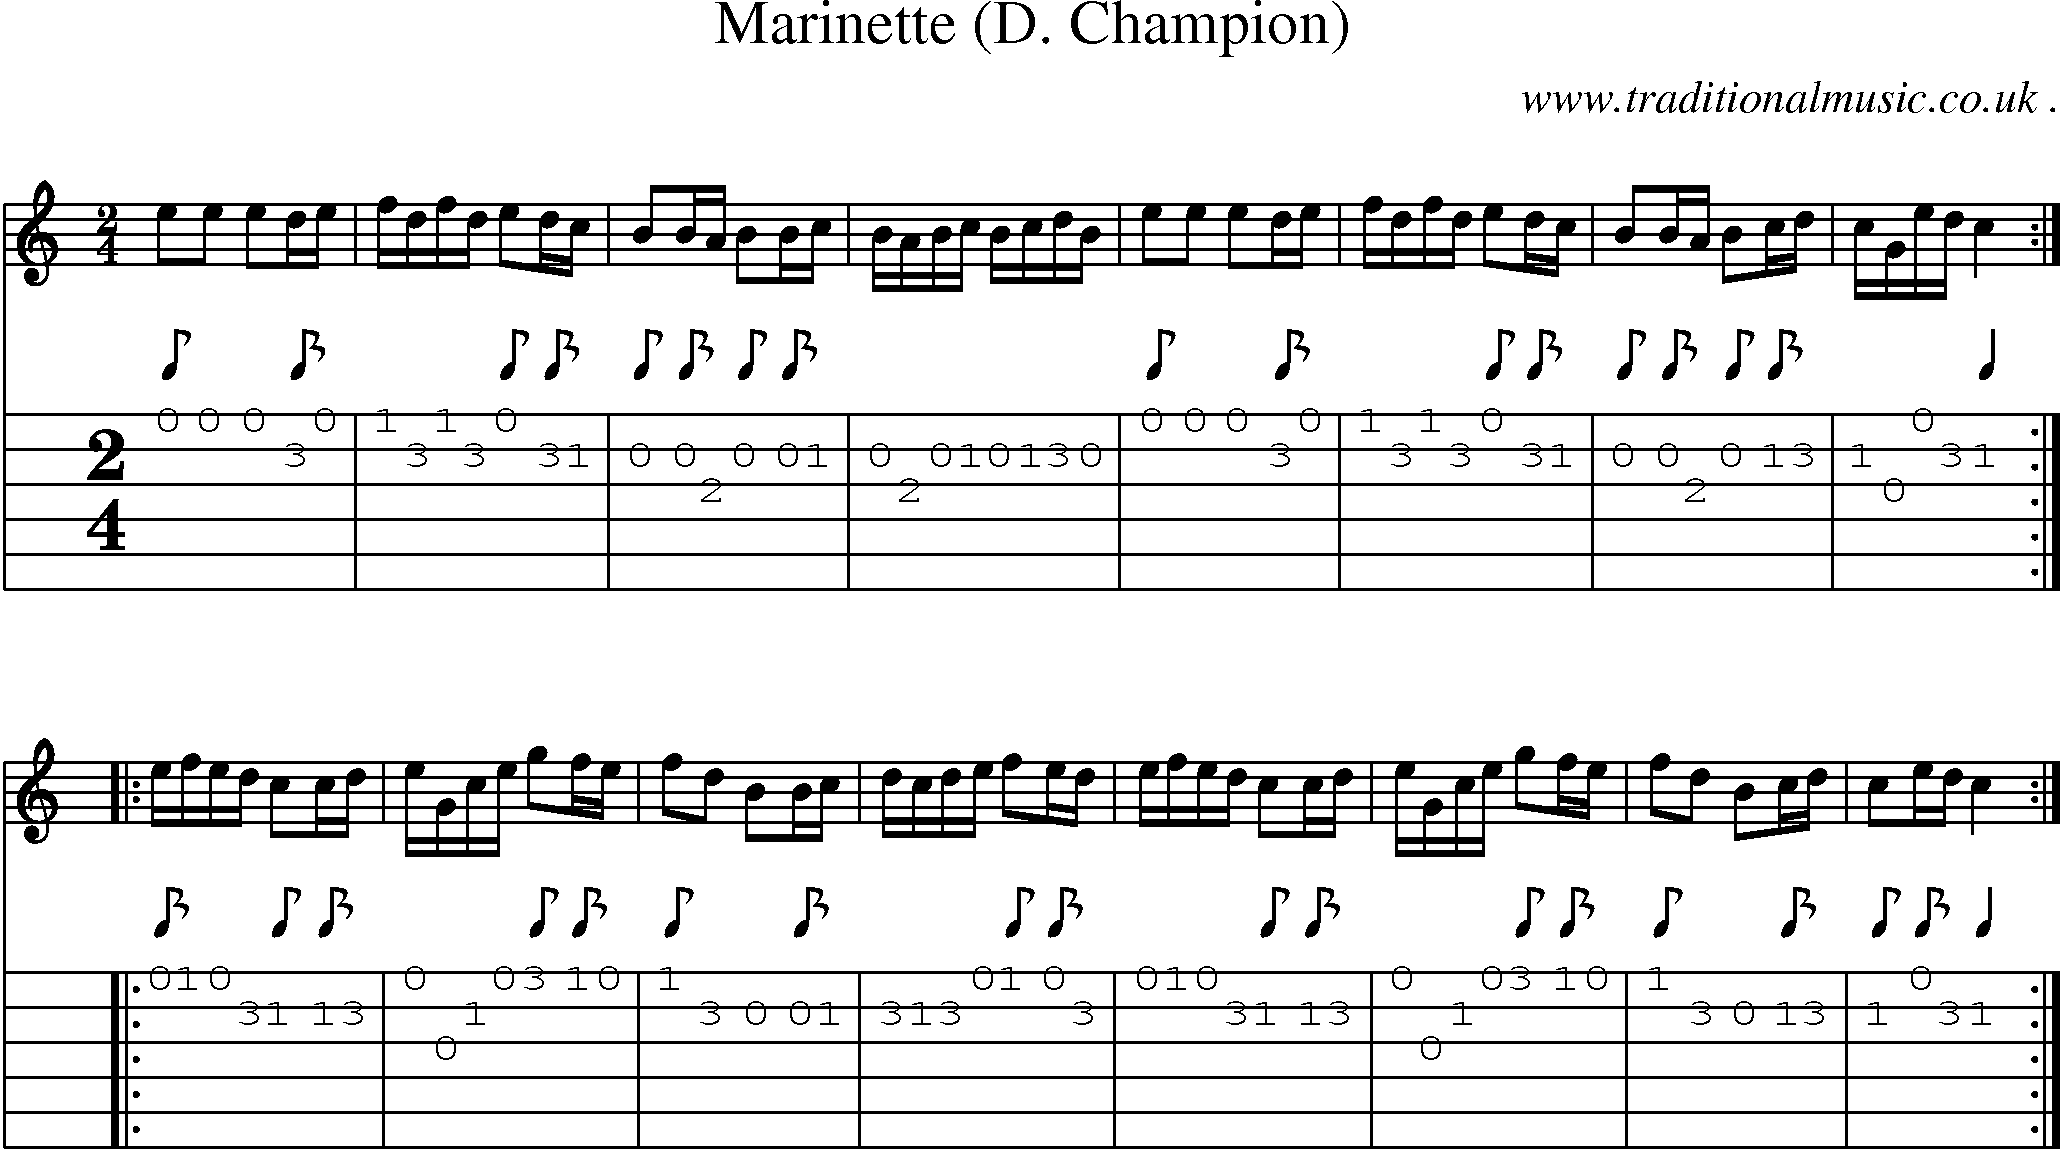 Sheet-Music and Guitar Tabs for Marinette (d Champion)